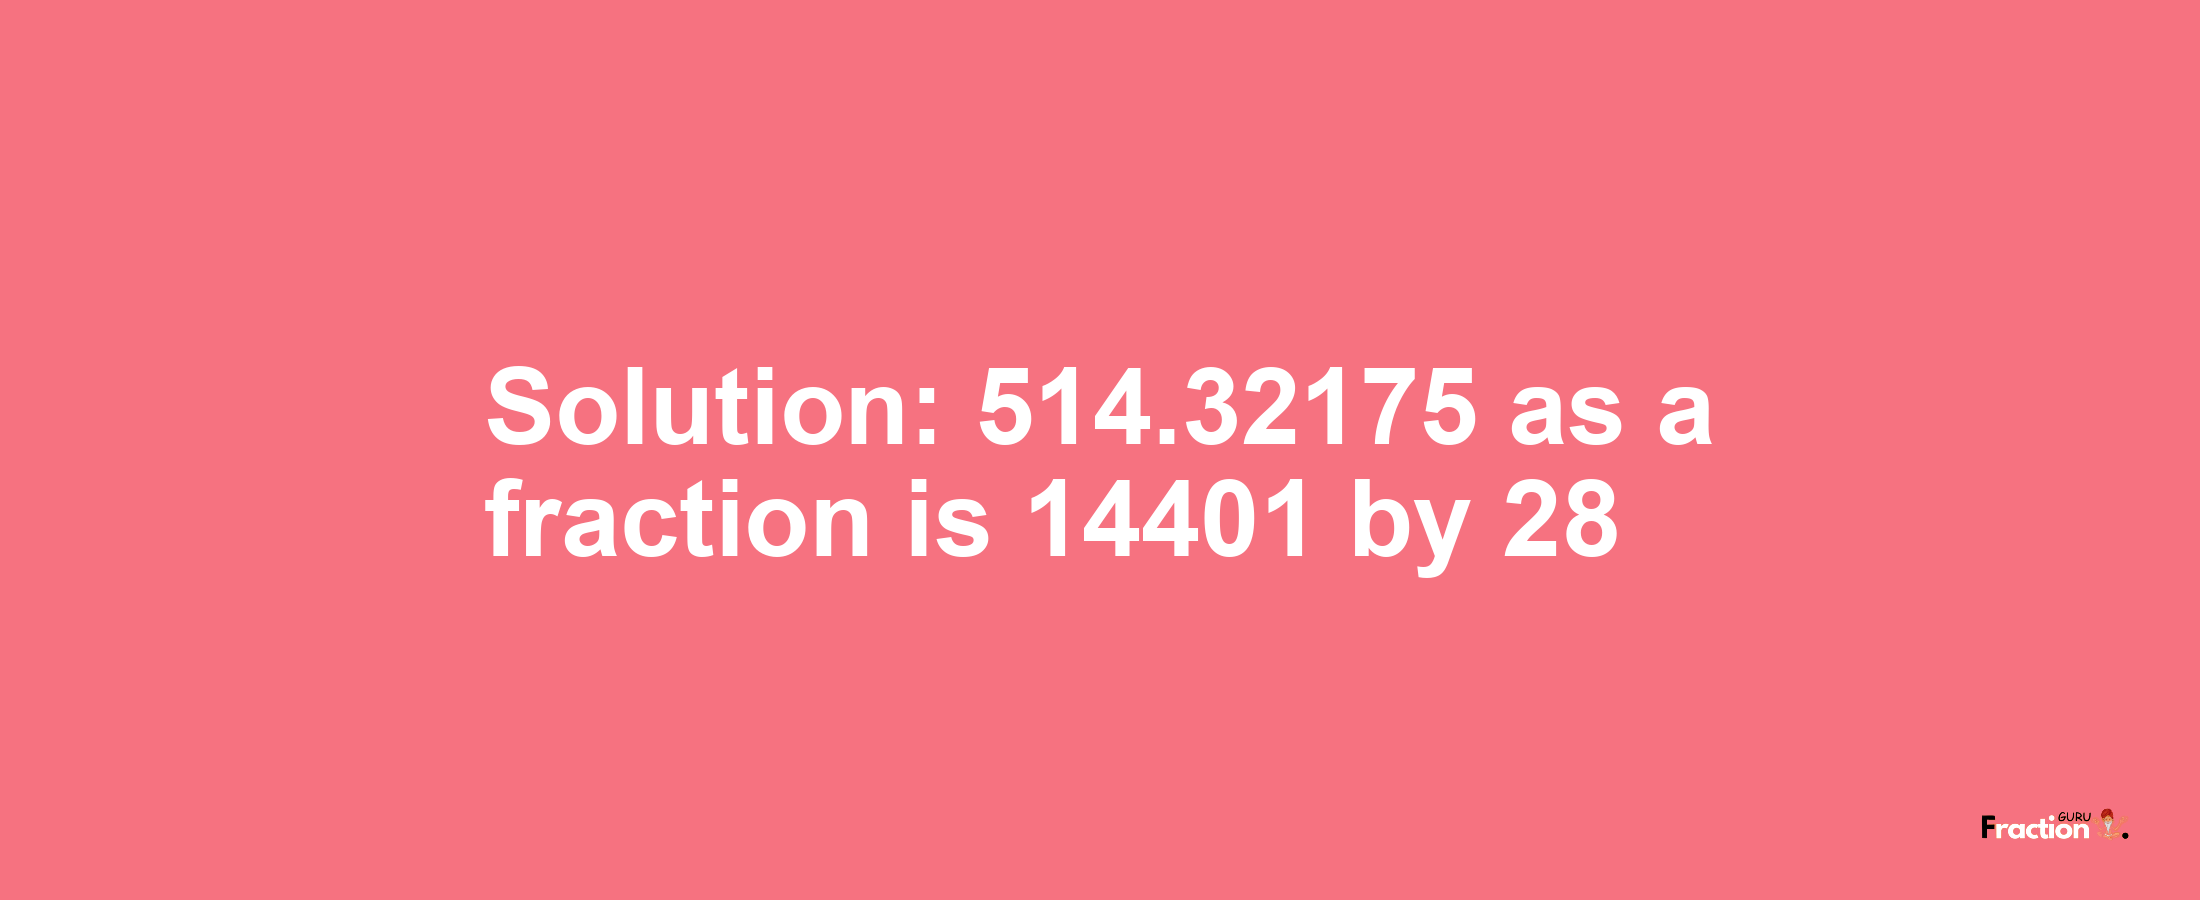 Solution:514.32175 as a fraction is 14401/28